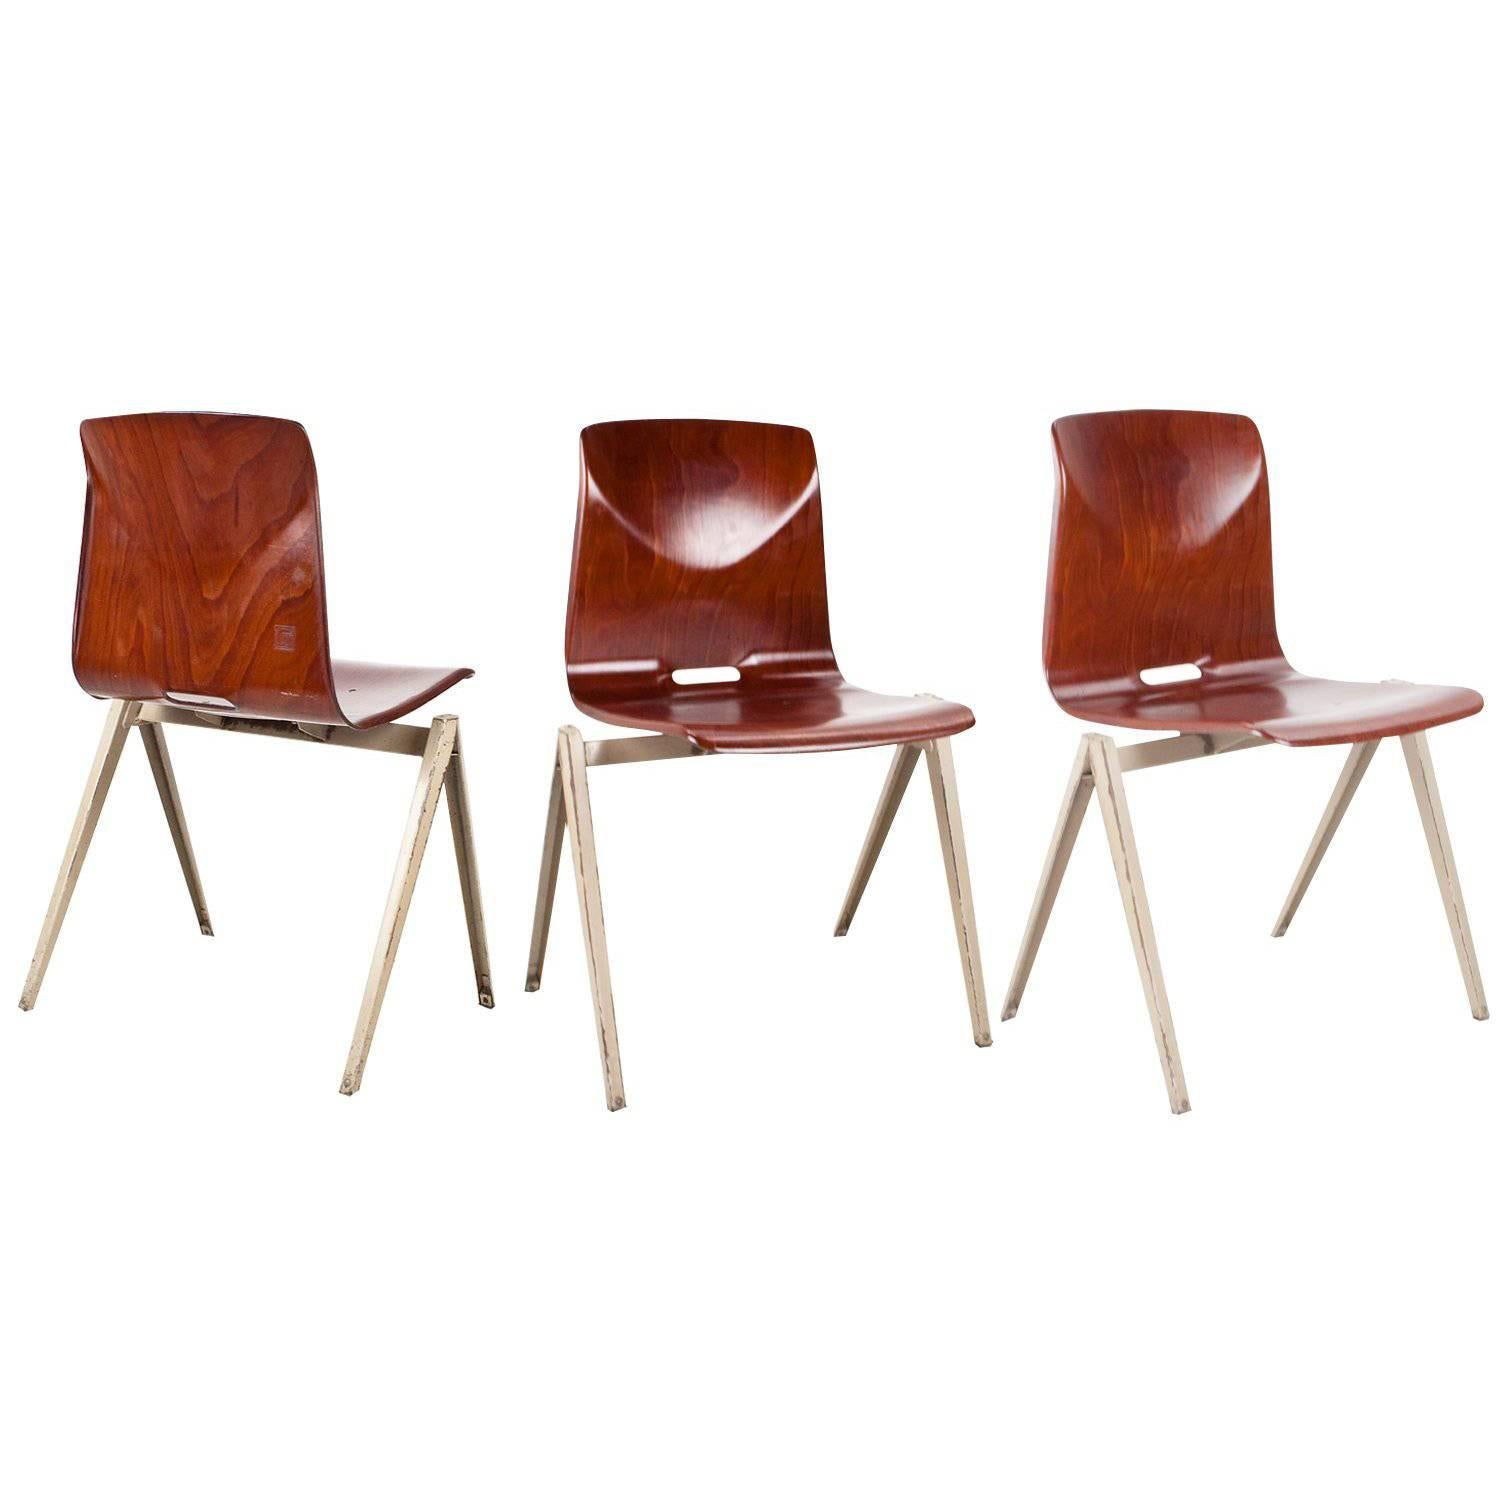 Original industrial Dutch Galvanitas school chairs, model S 22, set of eight. Chairs with pyramid frame, designed in 1967 by Galvanitas and inspired by the pyramid chairs of Wim Rietveld. 

The chairs are coproduced by Galvanitas and Pagholz